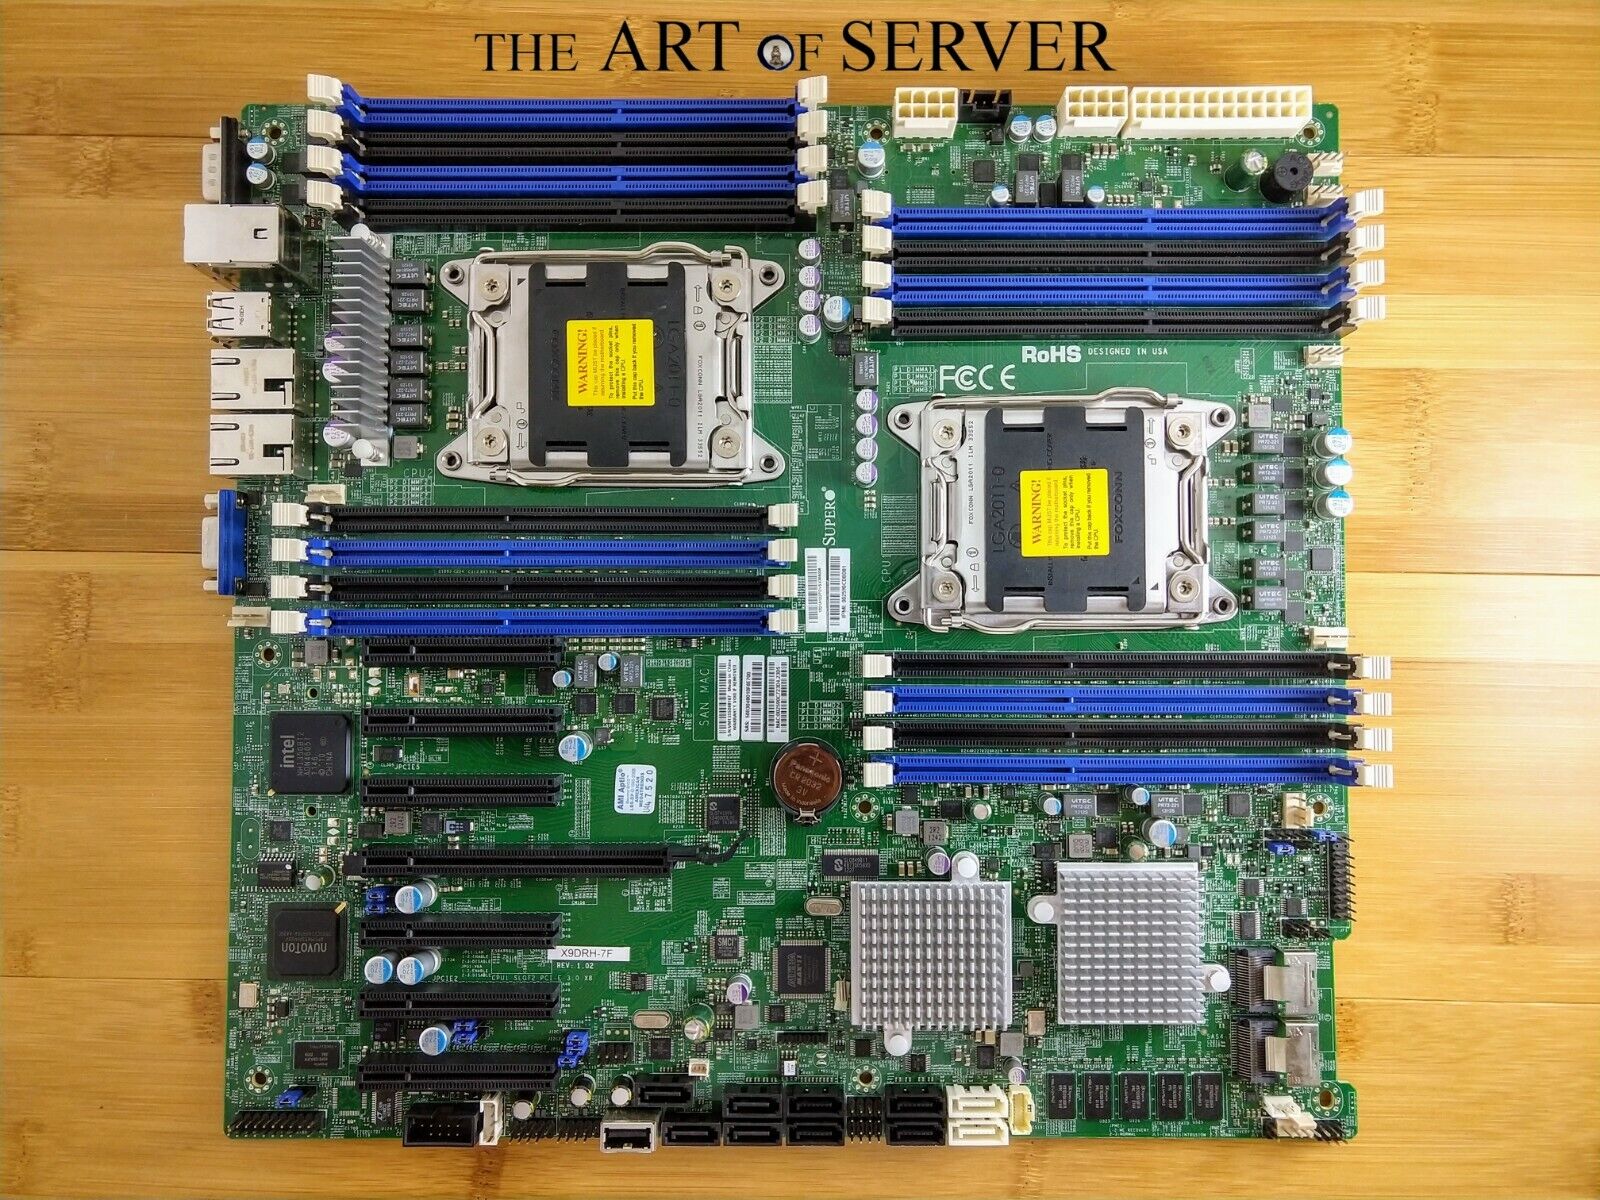 Supermicro X9DRH-7F Rev 1.02 v2 CPU TESTED IT mode LSI SAS2308 firmware for ZFS